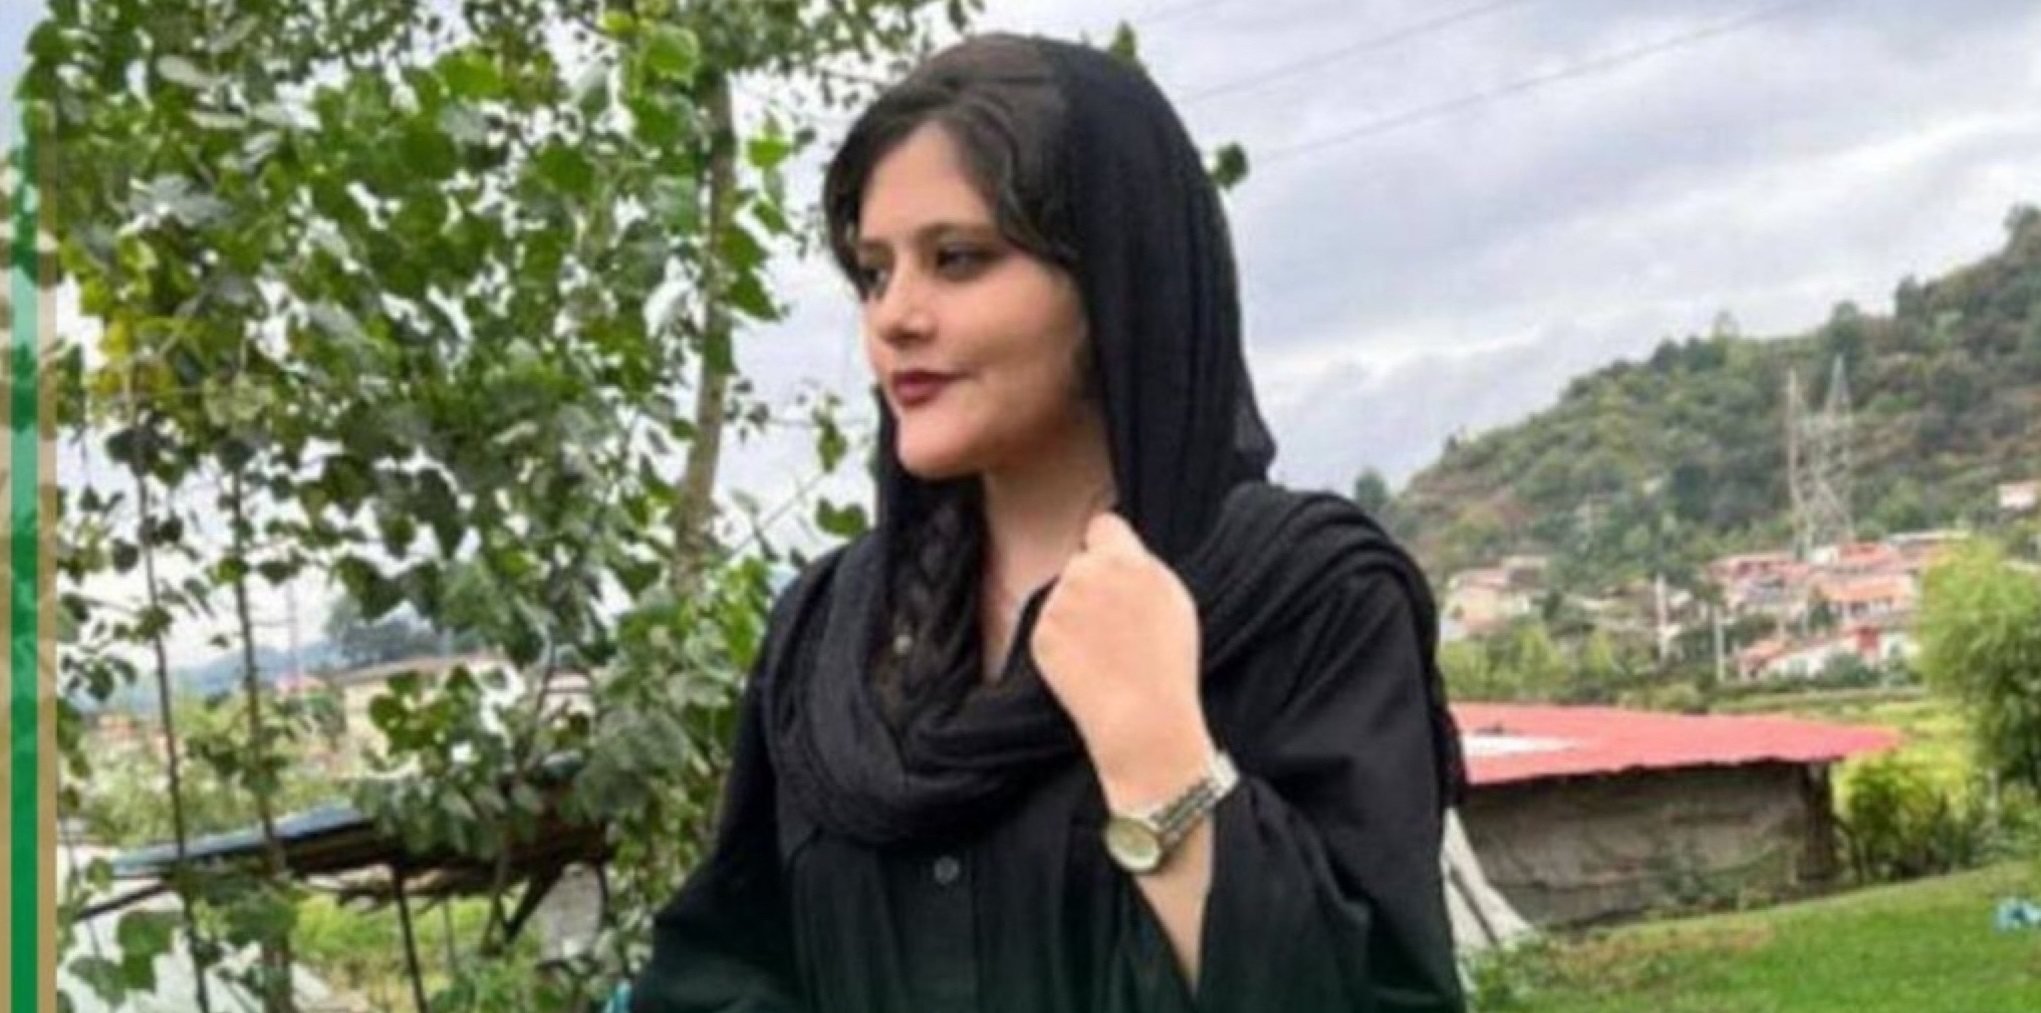 Mahsa Amini was on a visit with her family to Tehran, Iran when she was detained by the morality police. She was sent to hospital in a coma and later died. Photo: Twitter